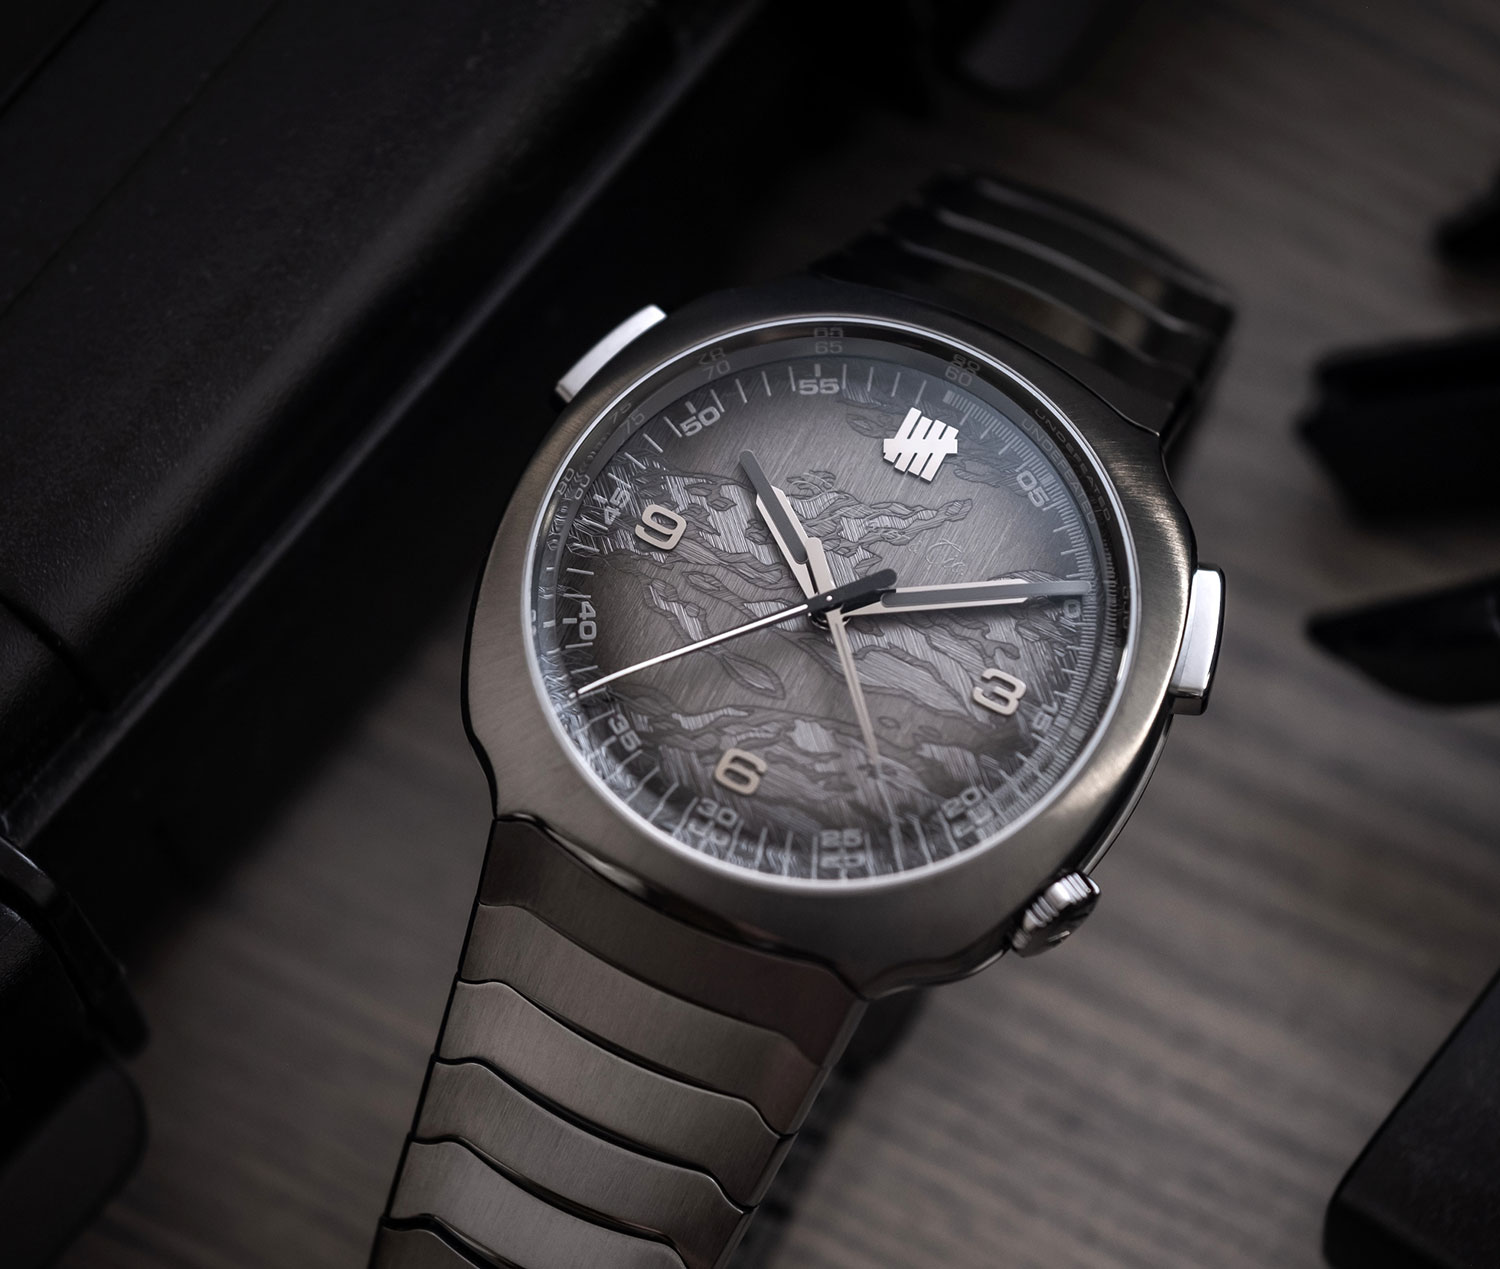 H. Moser & Cie. Streamliner Chronograph Undefeated